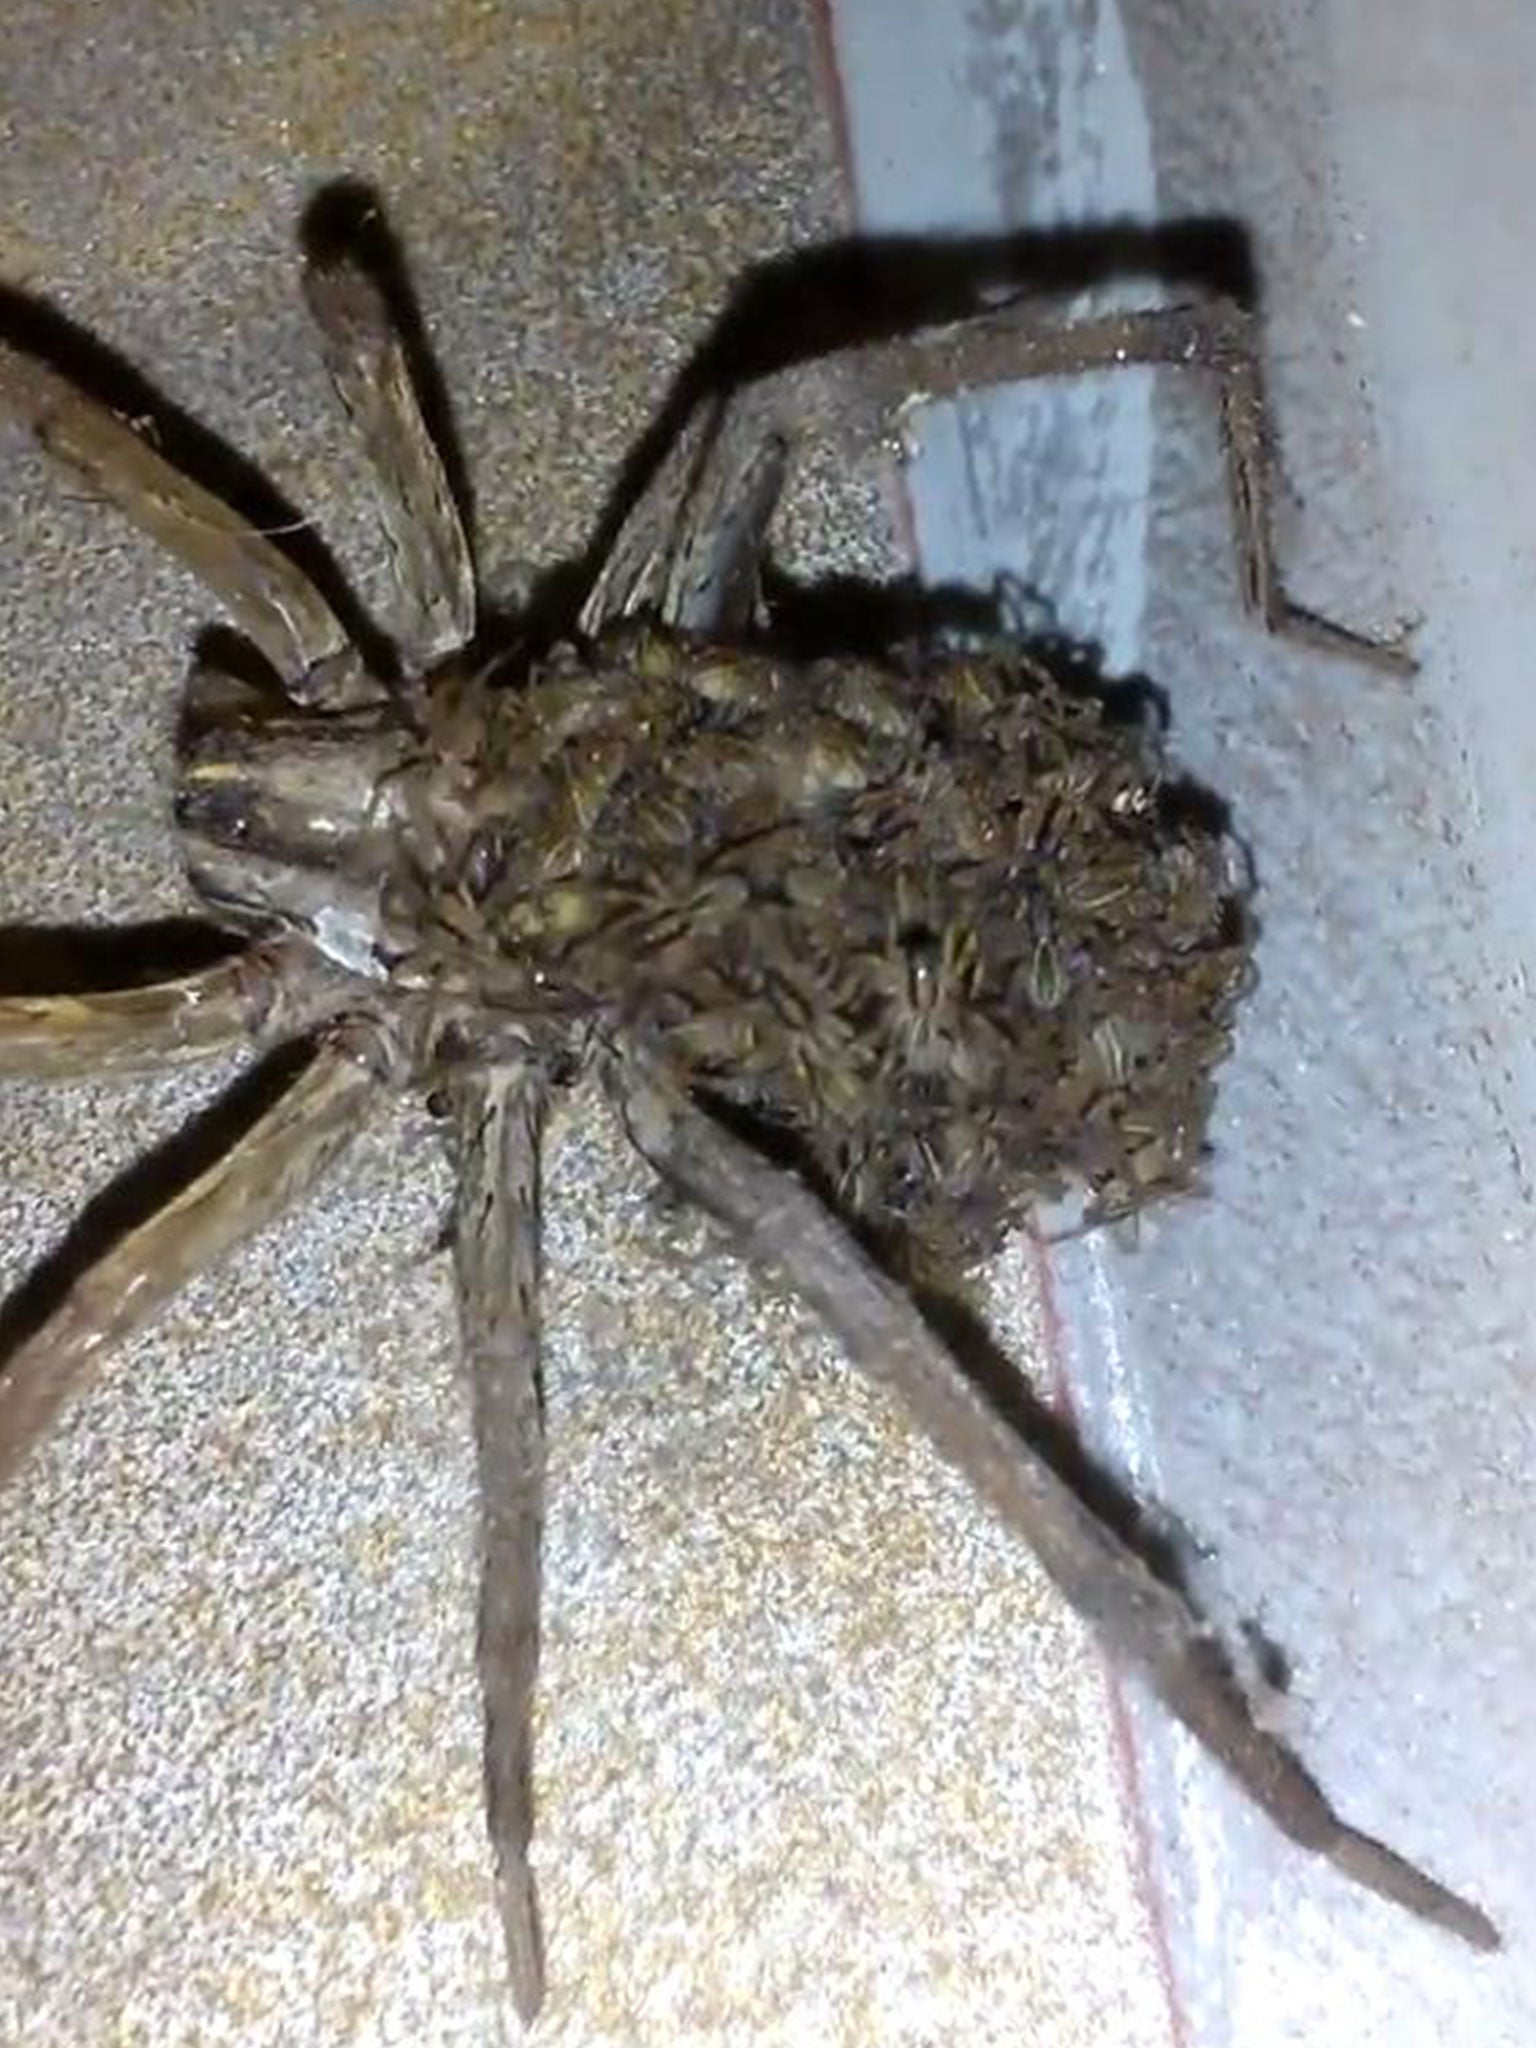 A picture of the wolf spider in a Missouri home